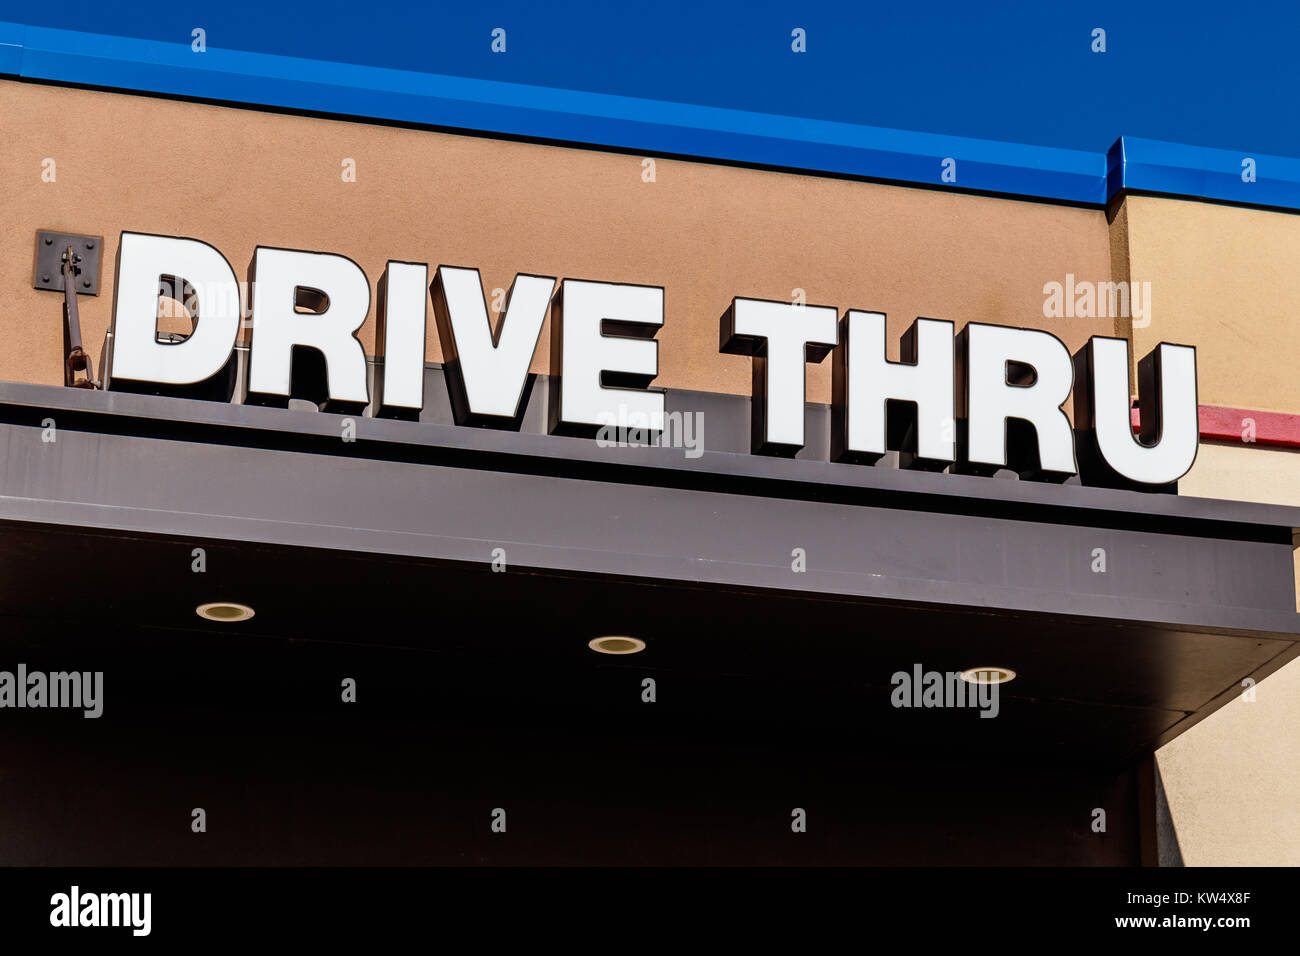 White and Blue Drive Thru sign set against a blue sky I Stock Photo